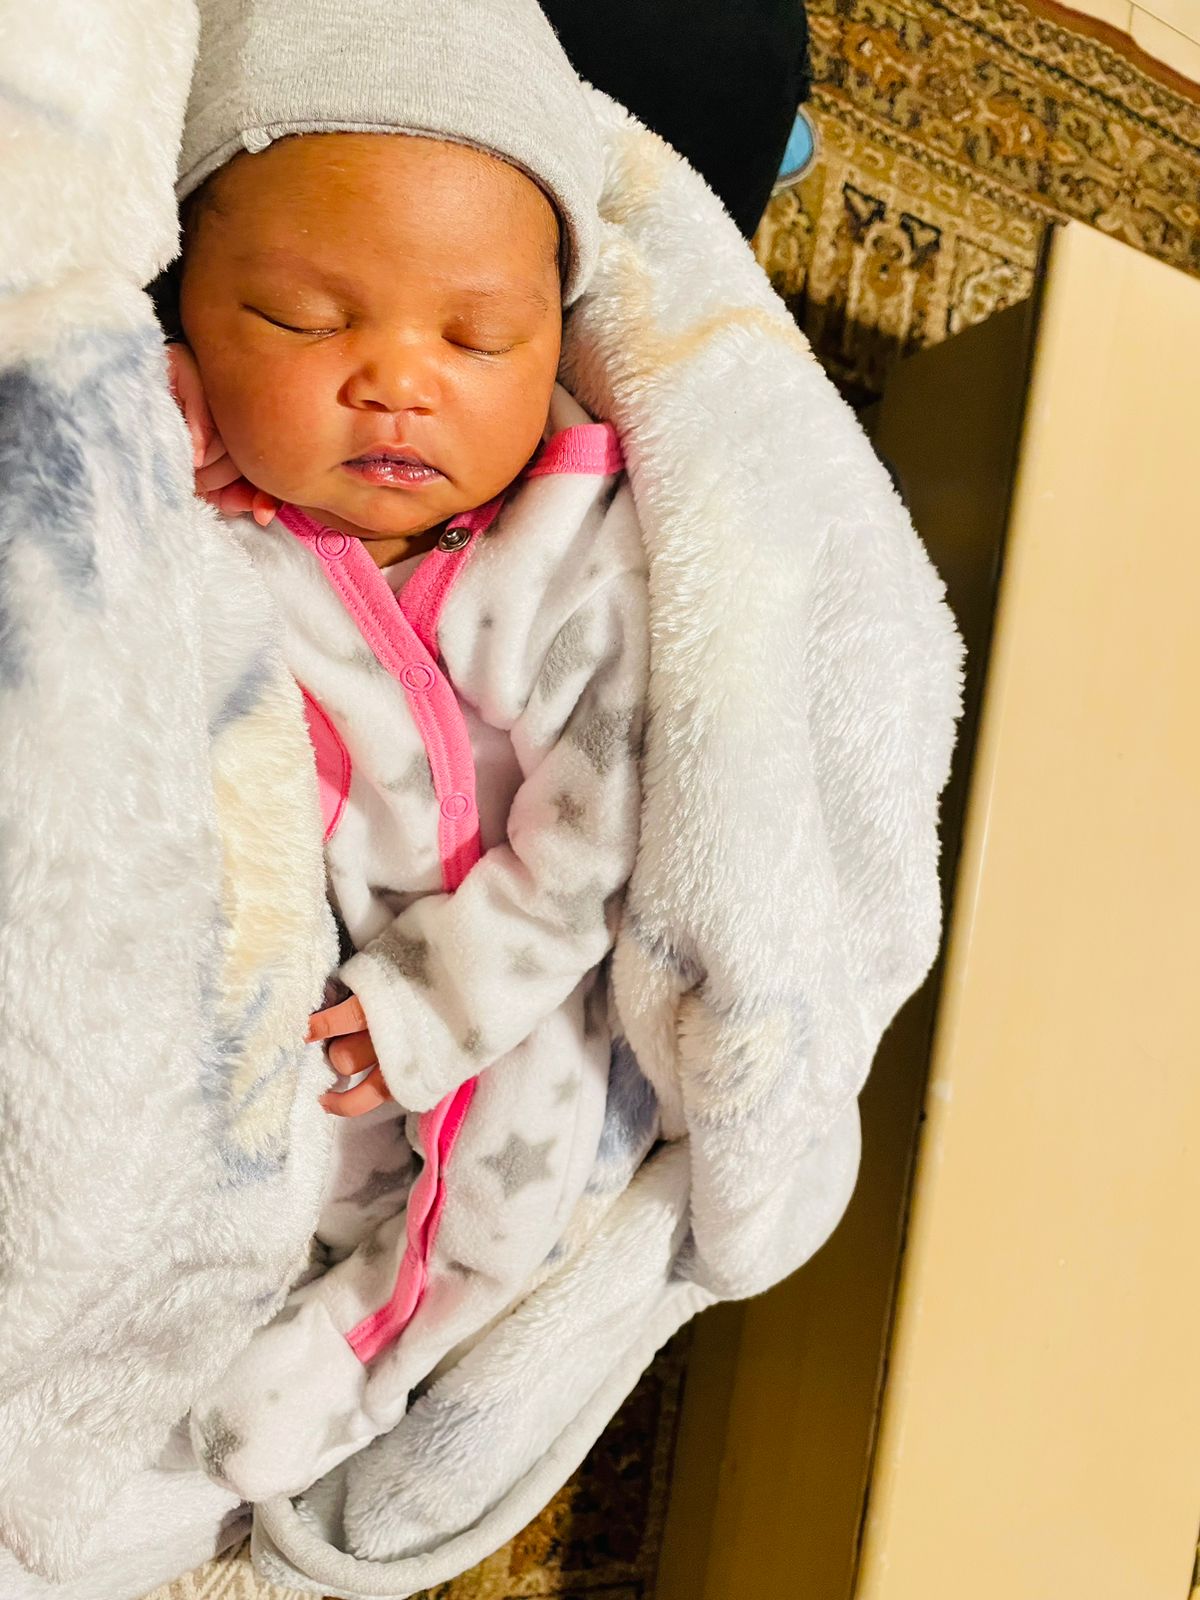 SAPS urgently requests information to locate the parents of a 2-week-old baby girl